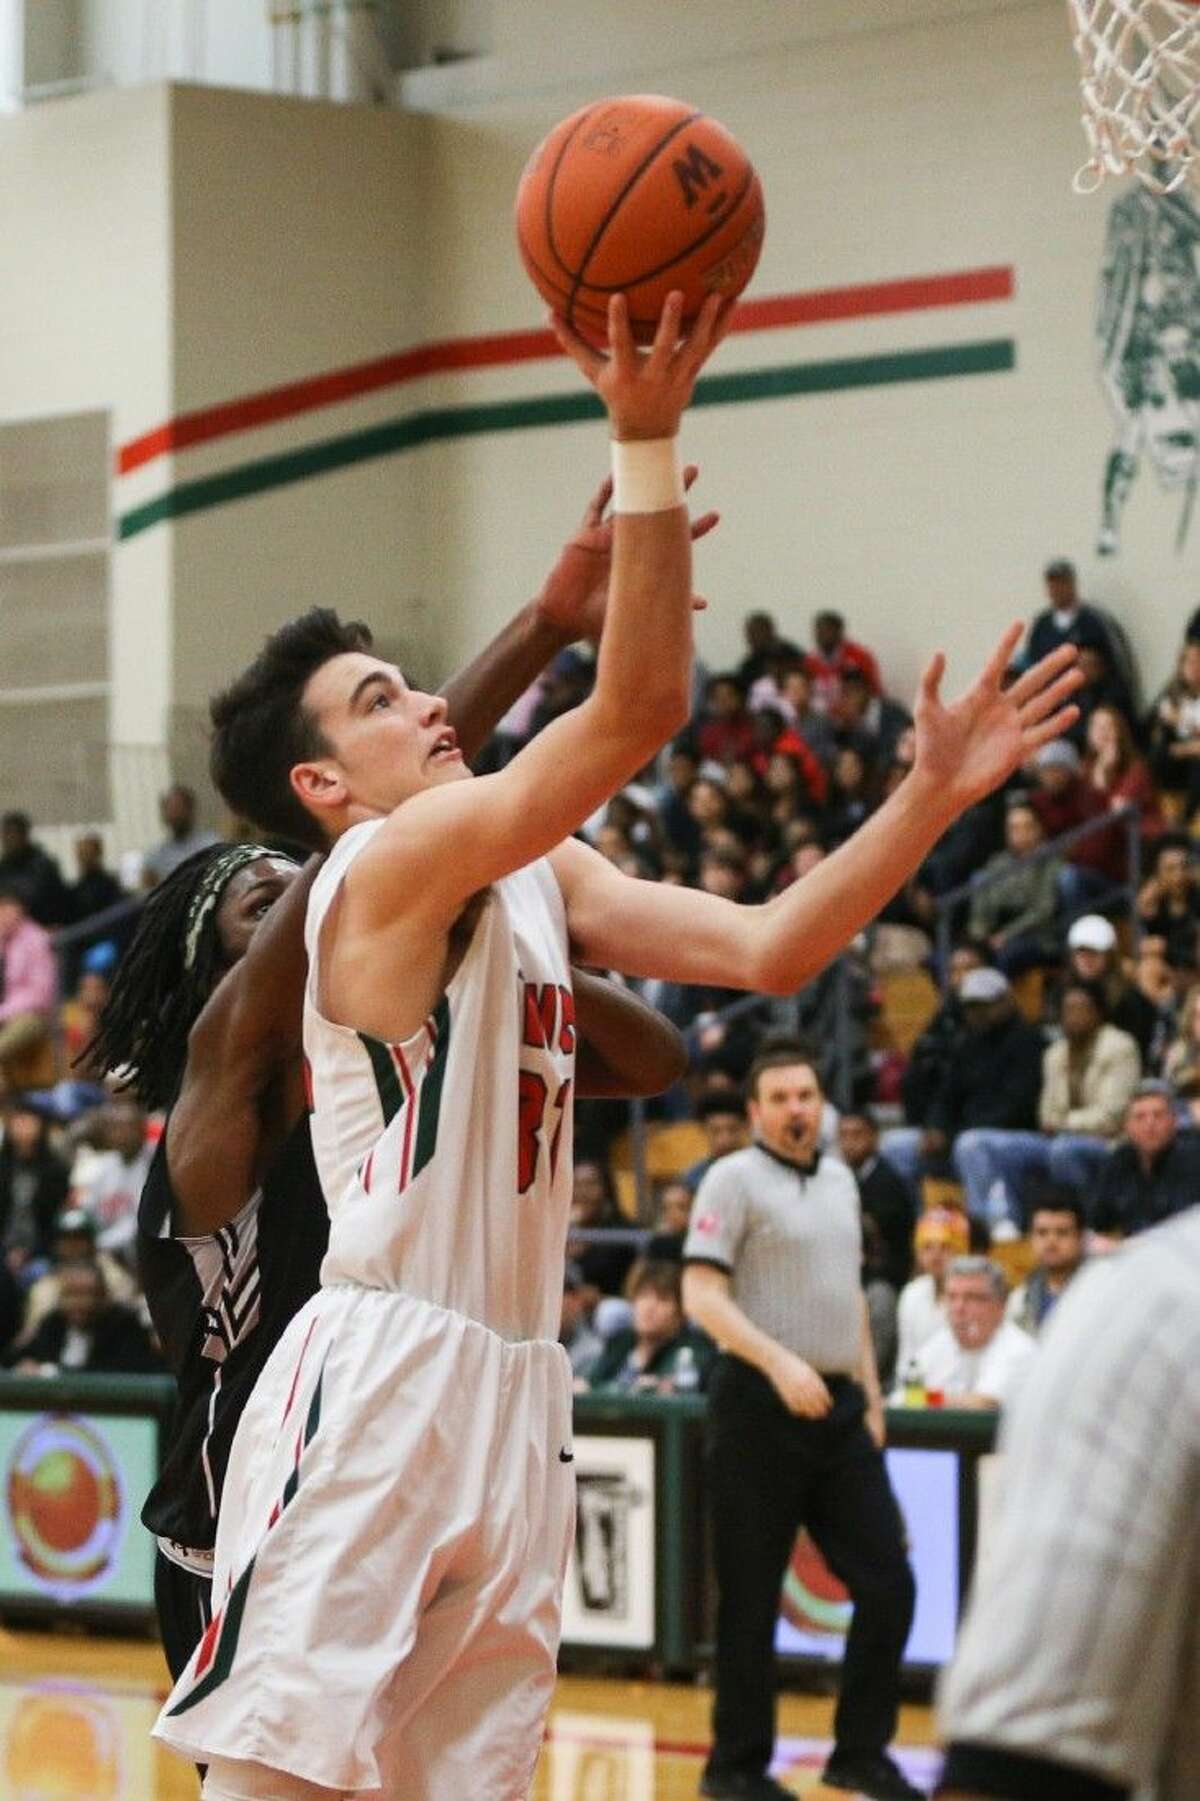 The Woodlands’ Carter Freas (31) goes for a layup during the high school boys basketball game against Conroe.